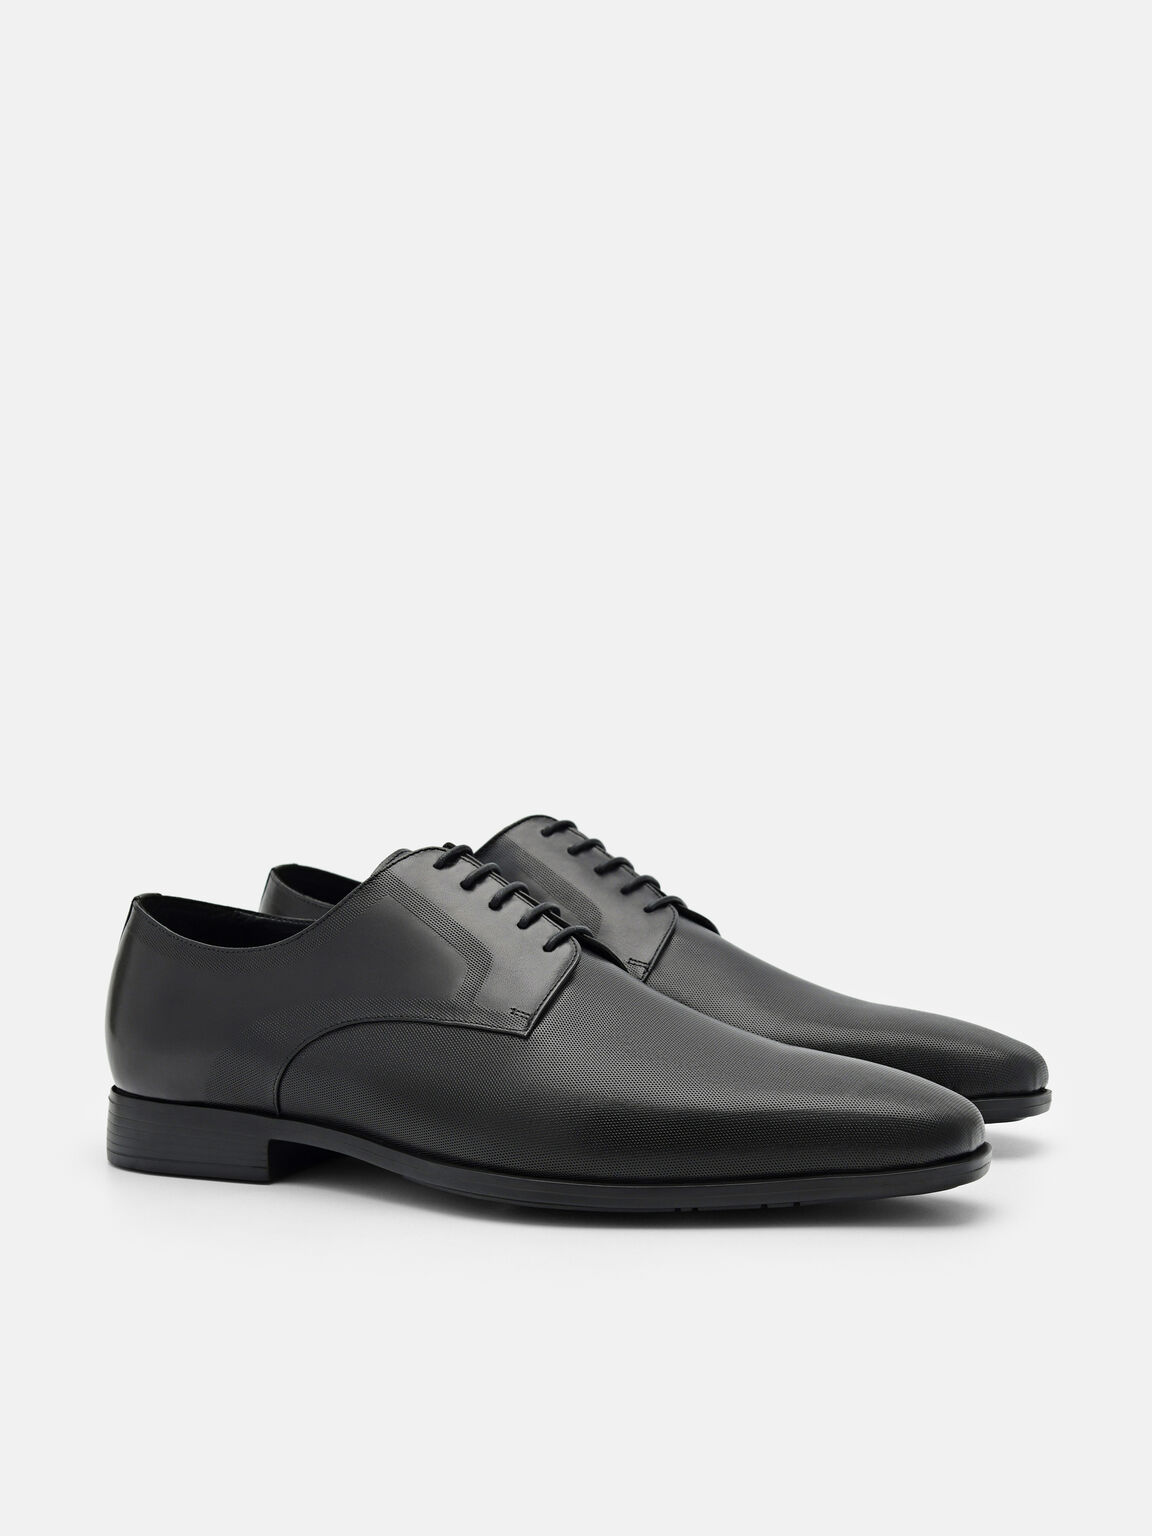 Altitude Lightweight Embossed Leather Derby Shoes, Black